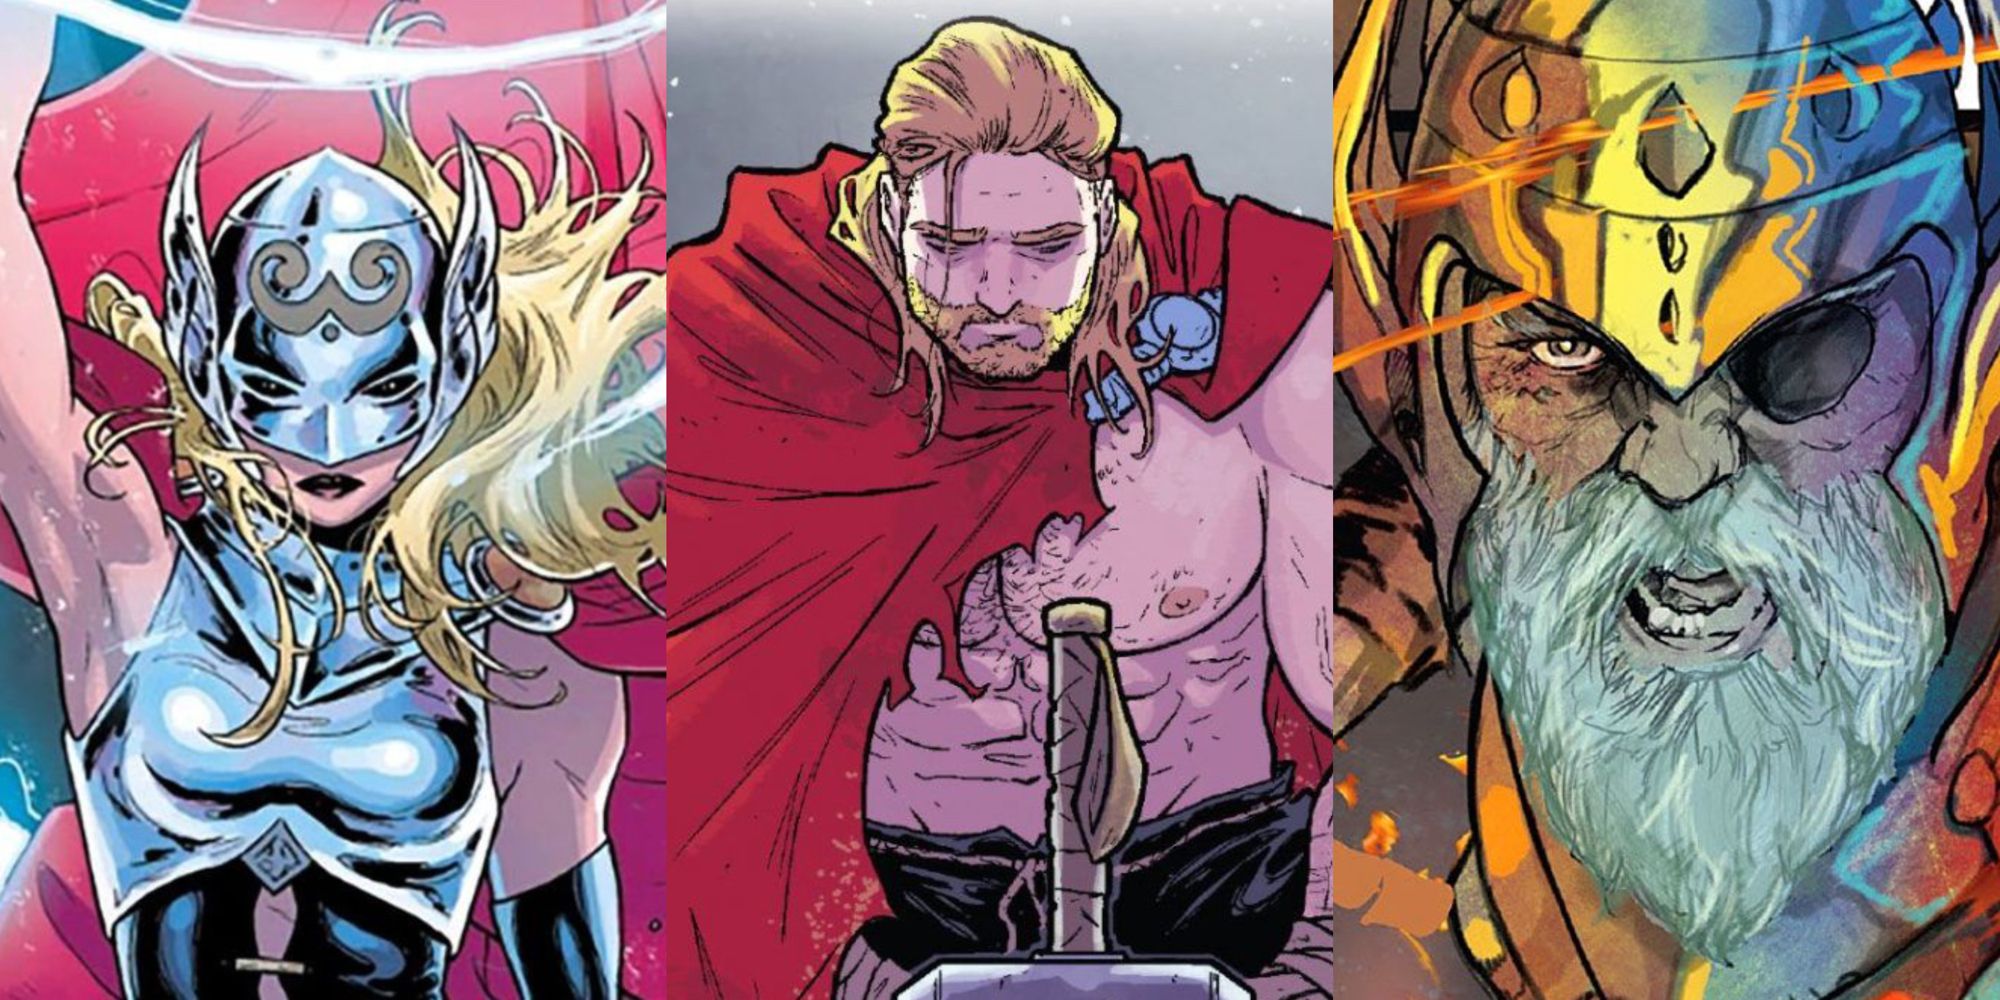 A split image of Jane Foster as Thor, a shirtless Thor, and King Thor in Marvel Comics